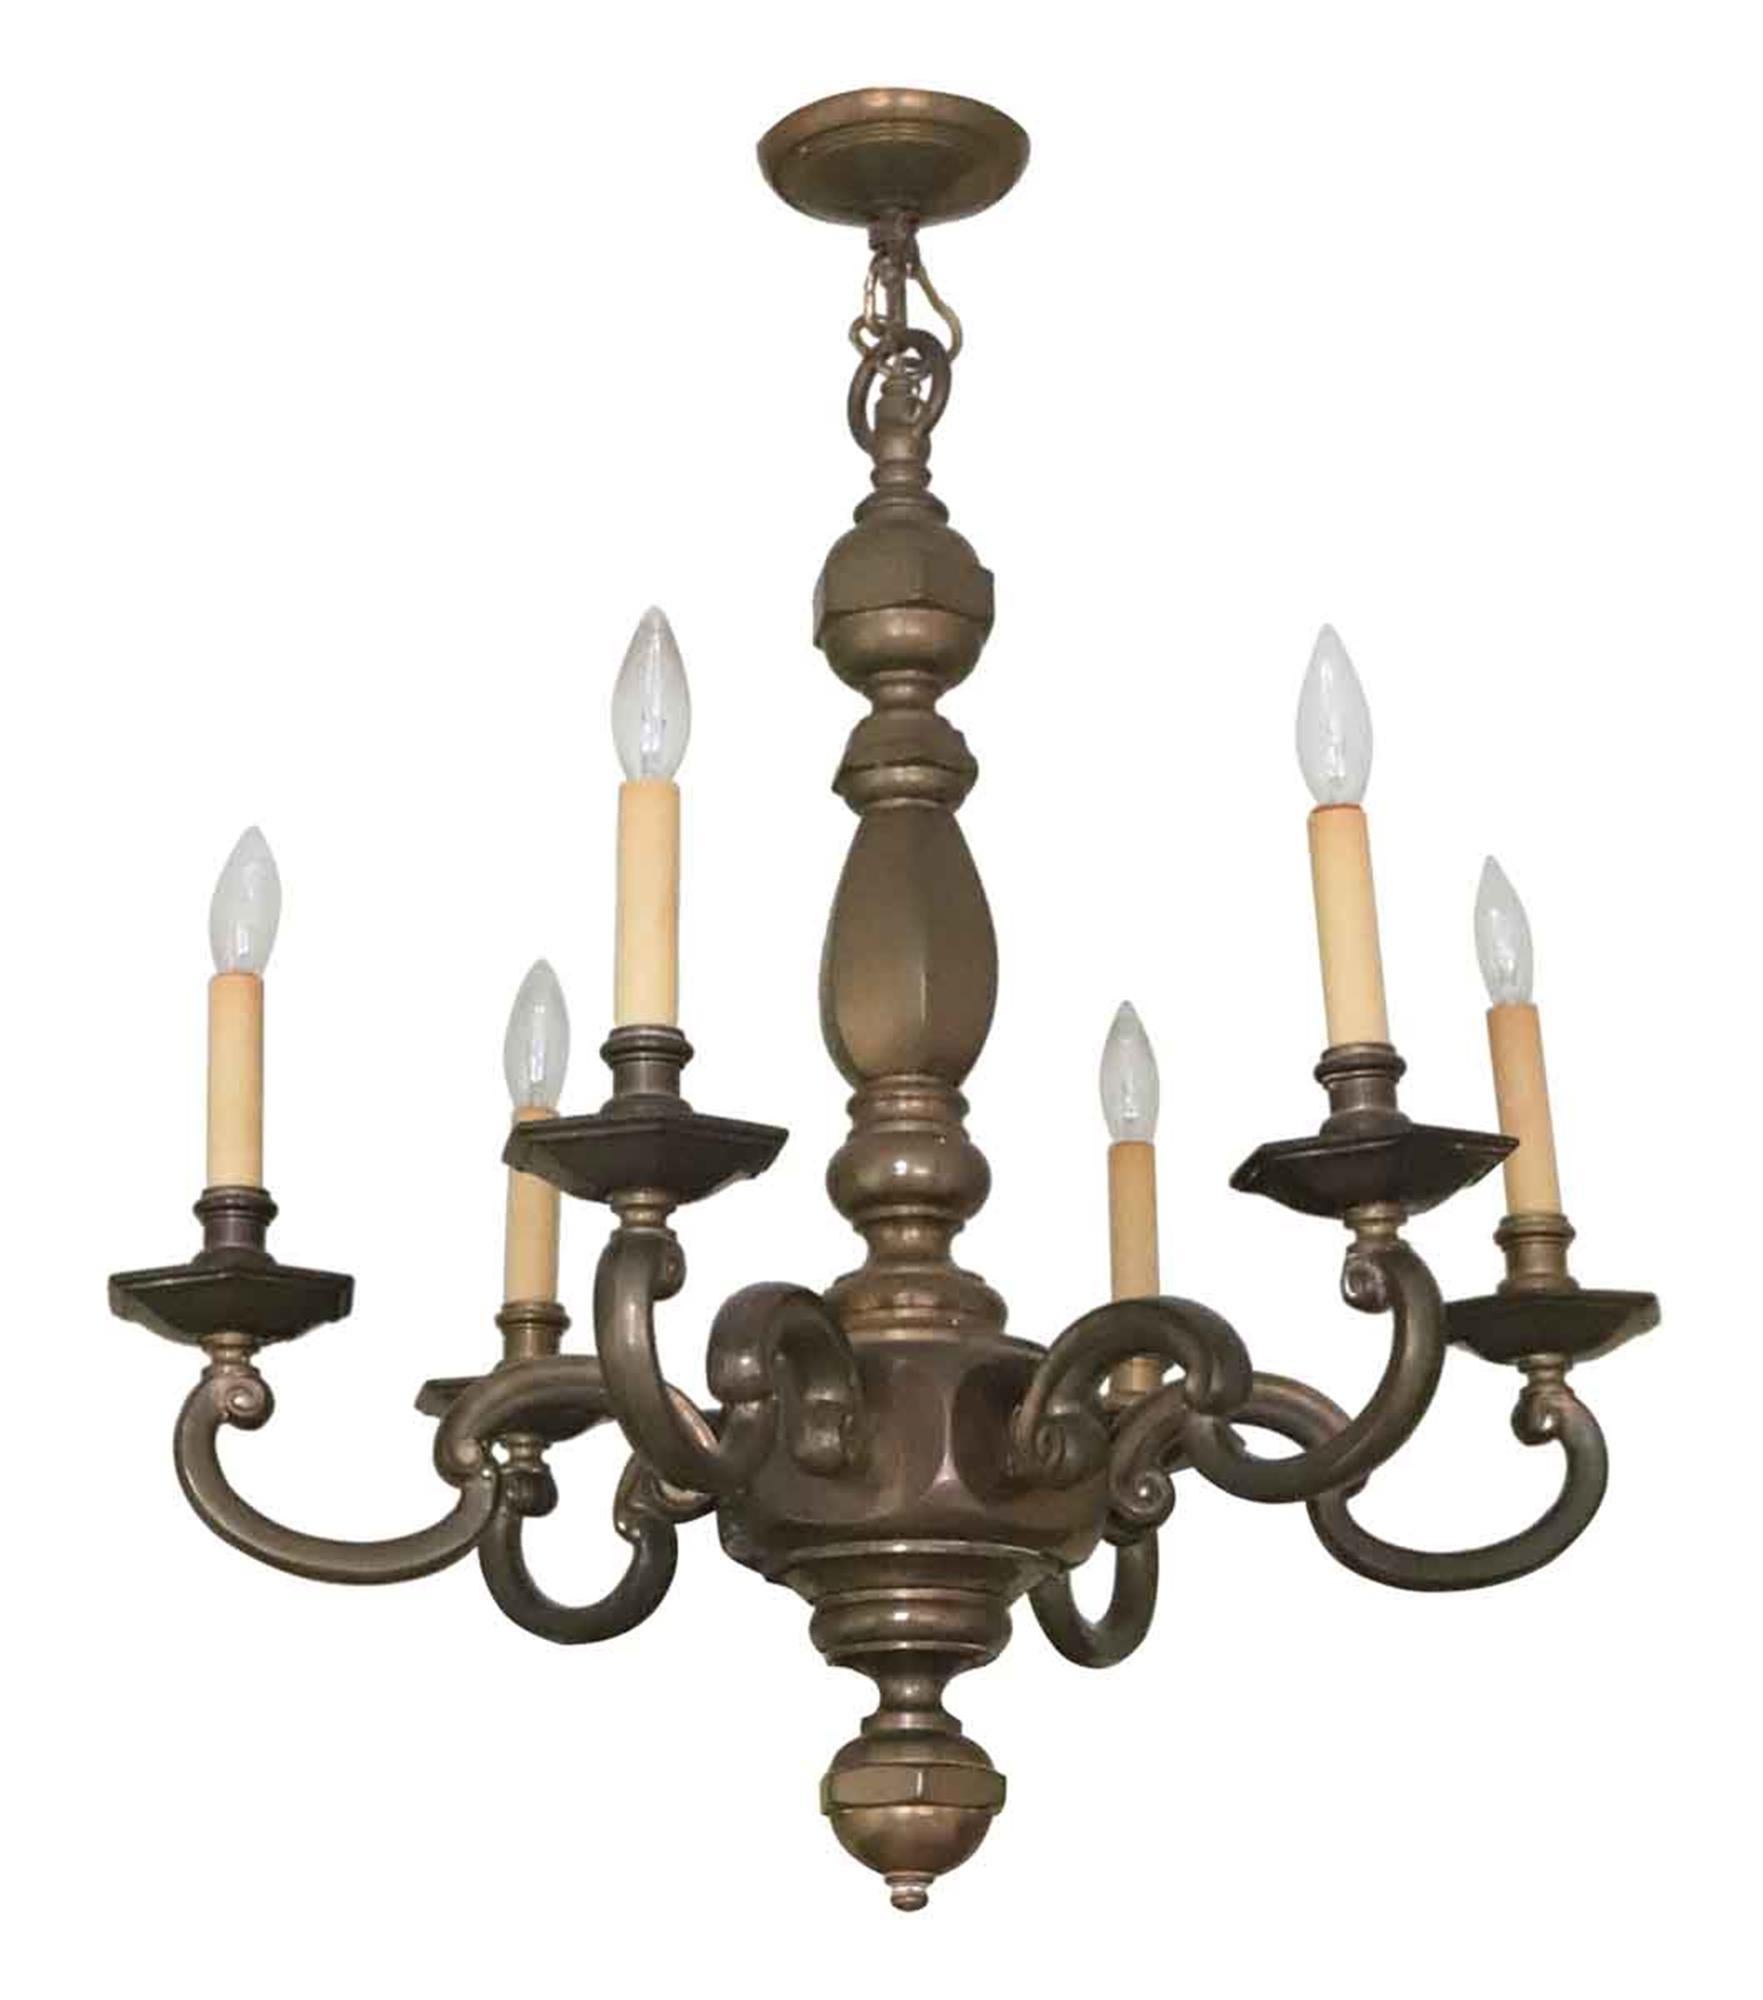 1980s cast bronze Georgian style six-arm chandelier original to the NYC Waldorf Astoria Hotel Towers. A Waldorf Astoria authenticity card included with your purchase. This can be seen at our 302 Bowery location in NoHo in Manhattan.